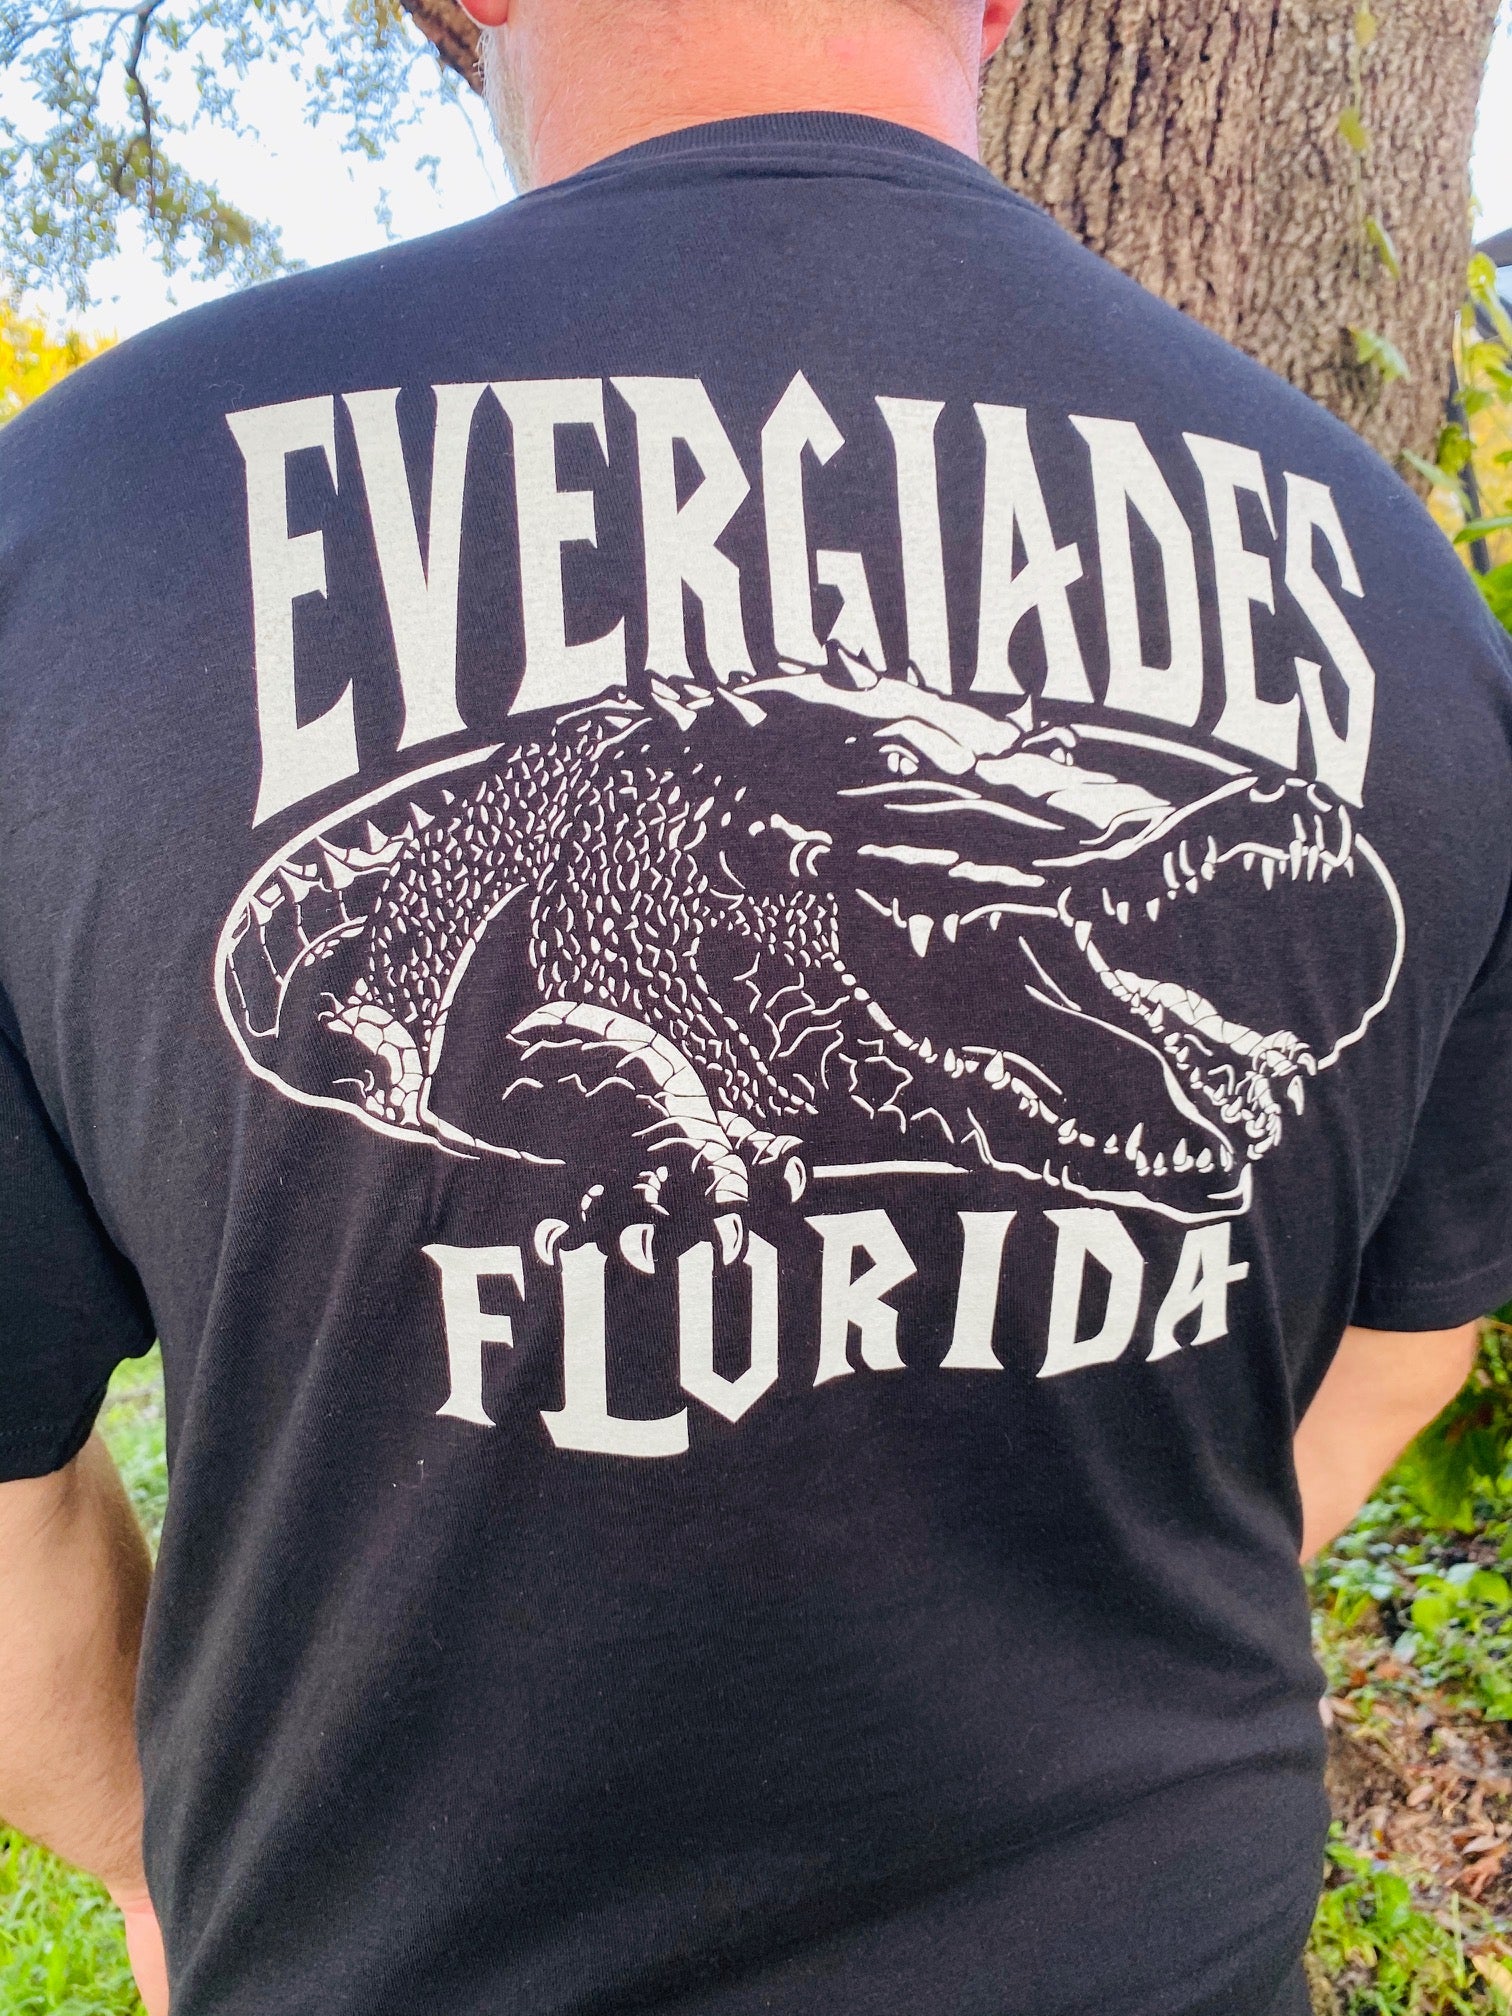 florida everblades products for sale